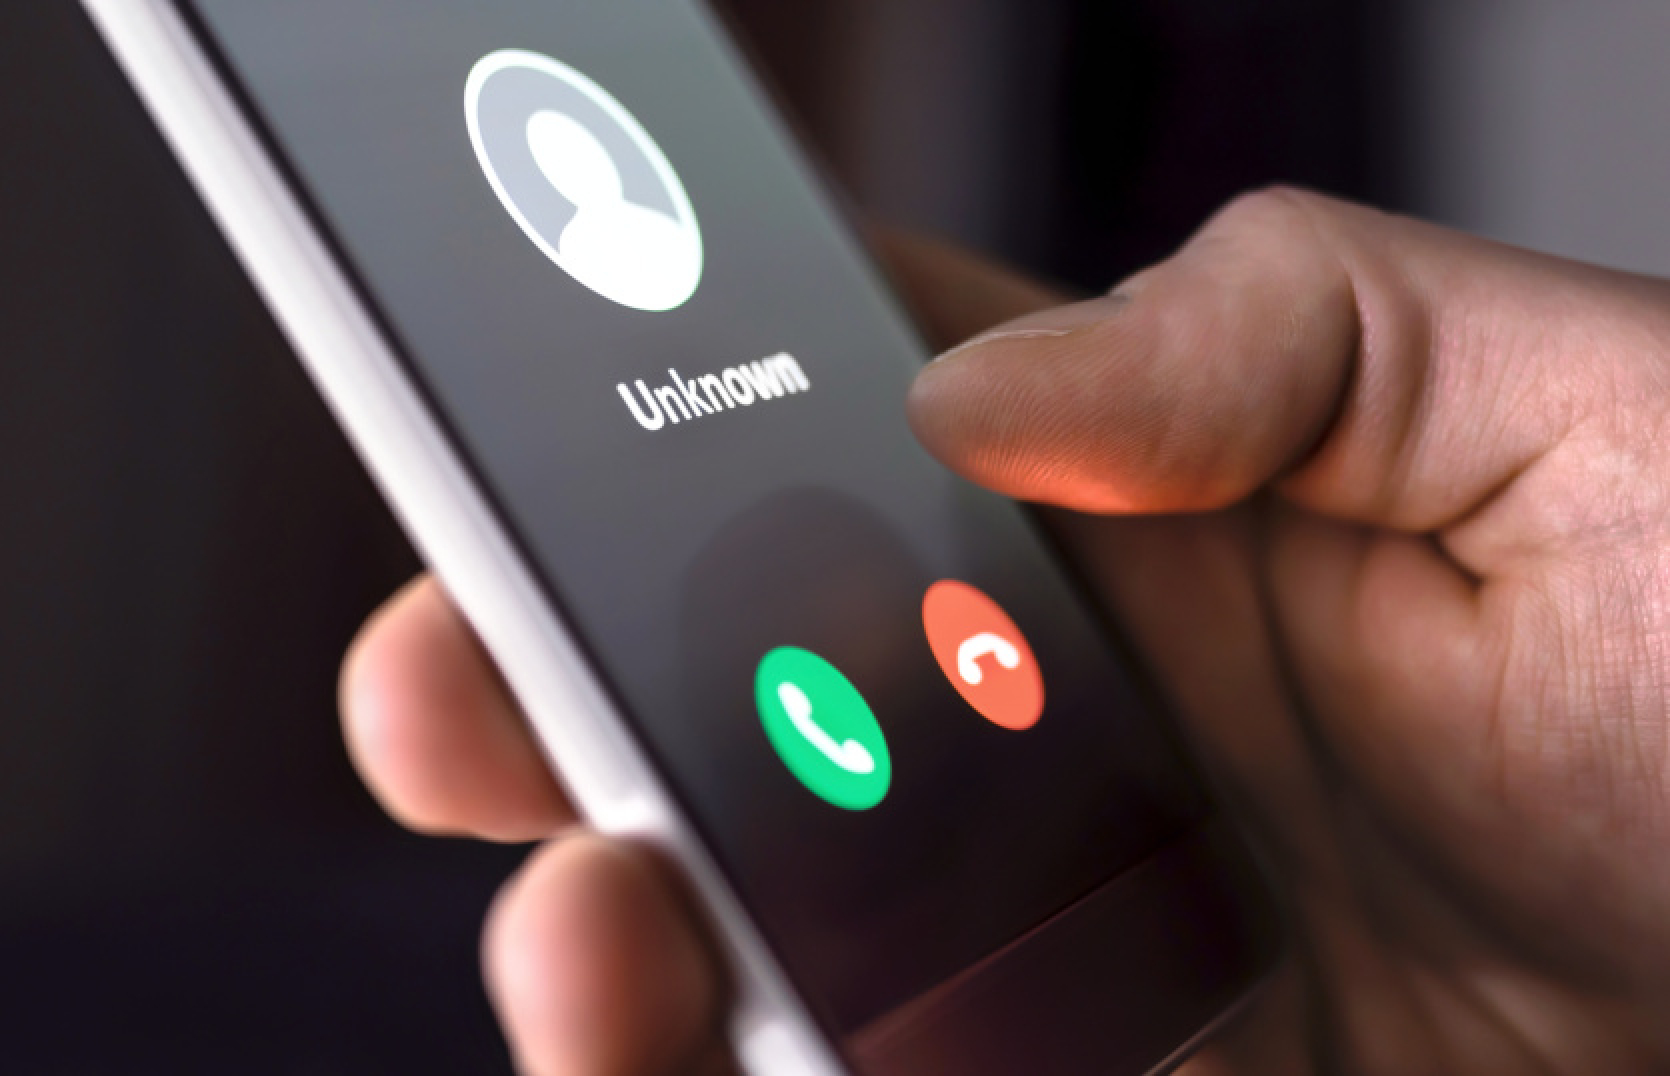 Calls only for their own: 56% of Ukrainians do not pick up the phone when unknown numbers call